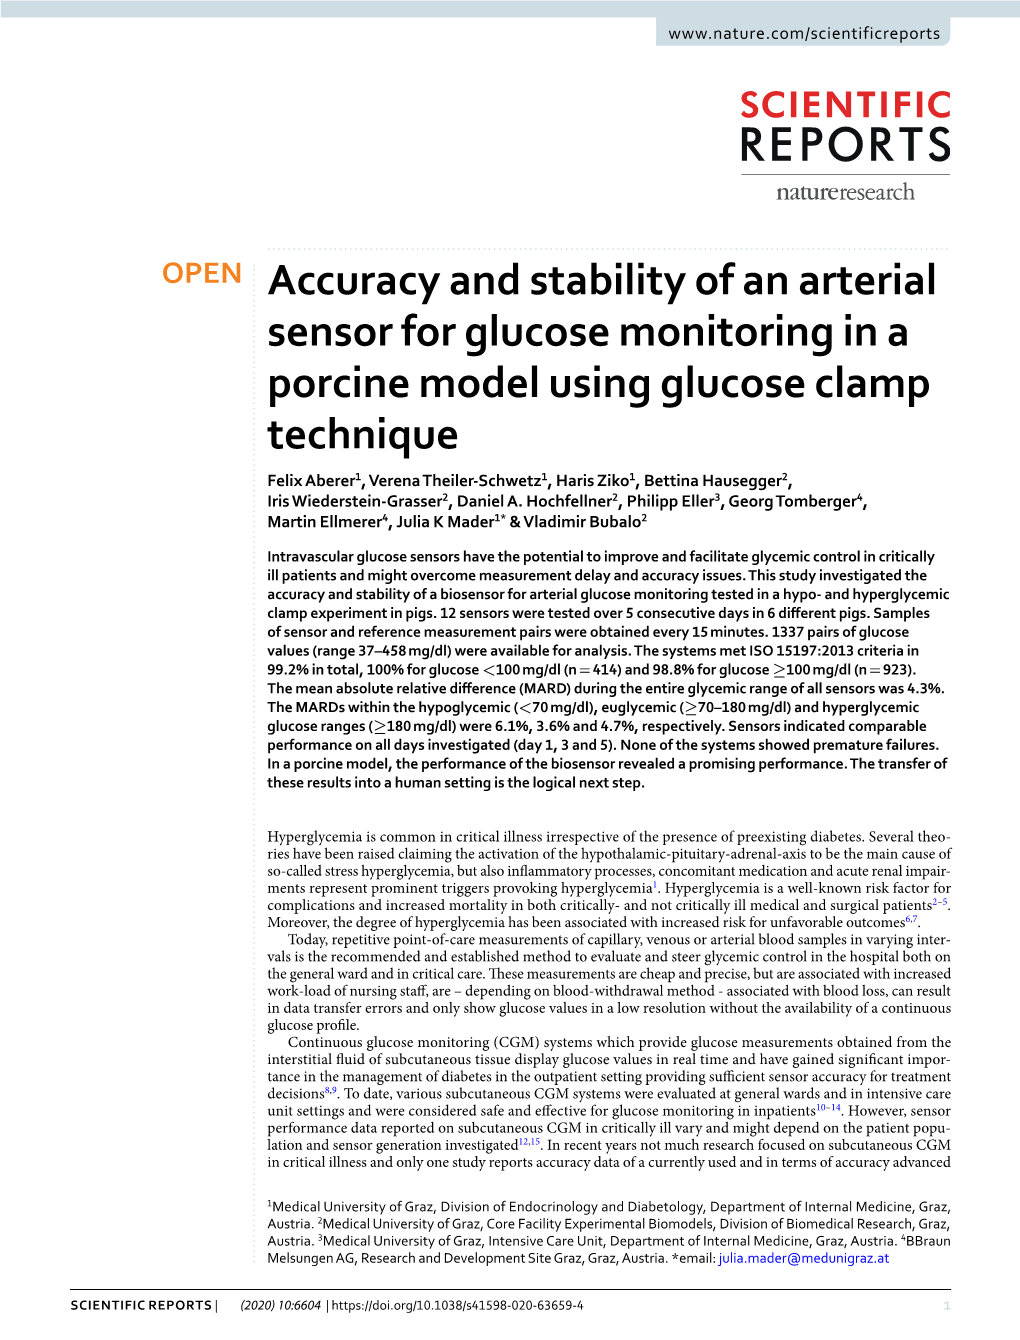 Accuracy and Stability of an Arterial Sensor for Glucose Monitoring in A